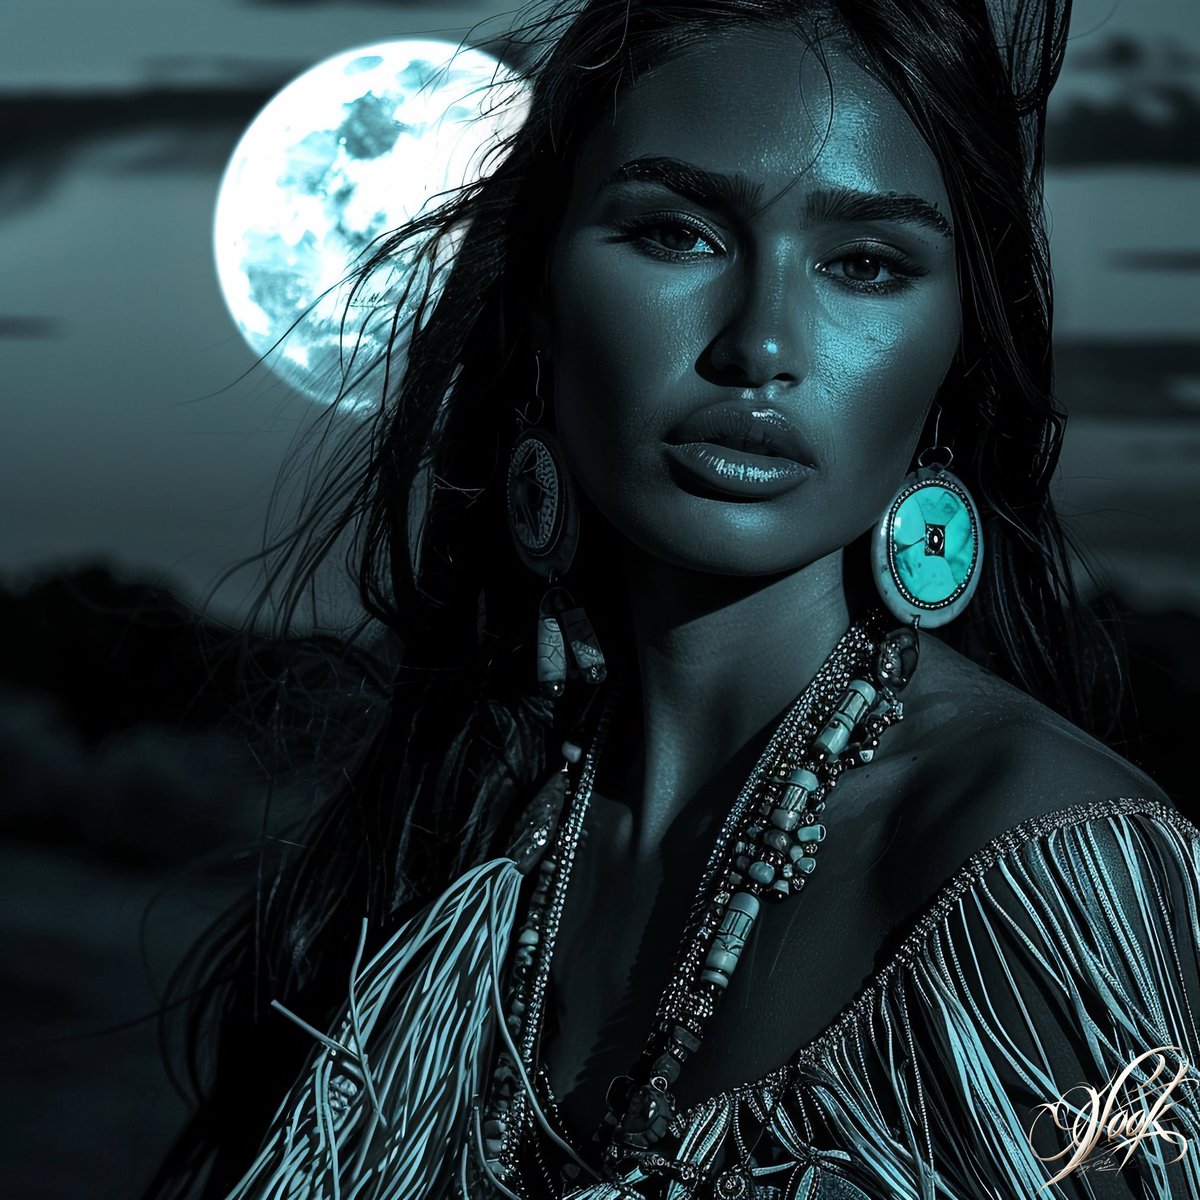 Good night!💫✨ Bathed in moonlight, her gaze tells tales of ancient mystique. 🌕✨ Adorned with the treasures of the earth, she is the midnight queen reigning over the realm of dreams.